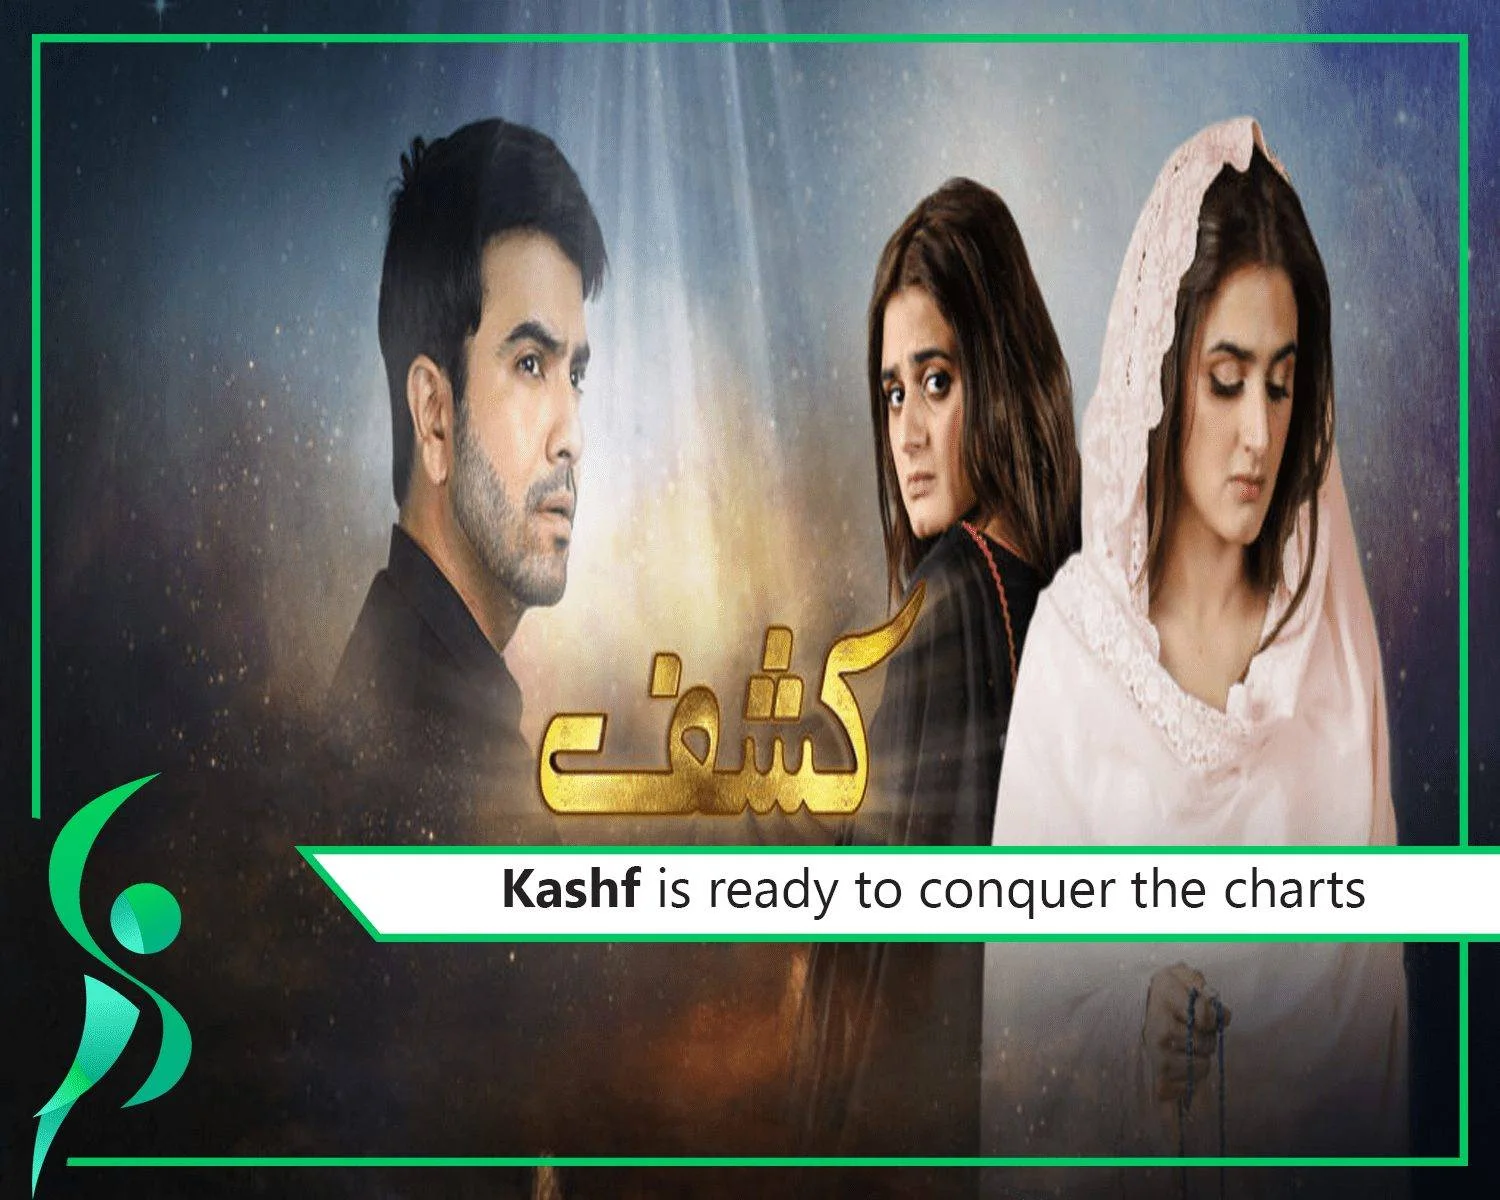 Junaid Khan's new project "Kashf" is ready to hit the charts